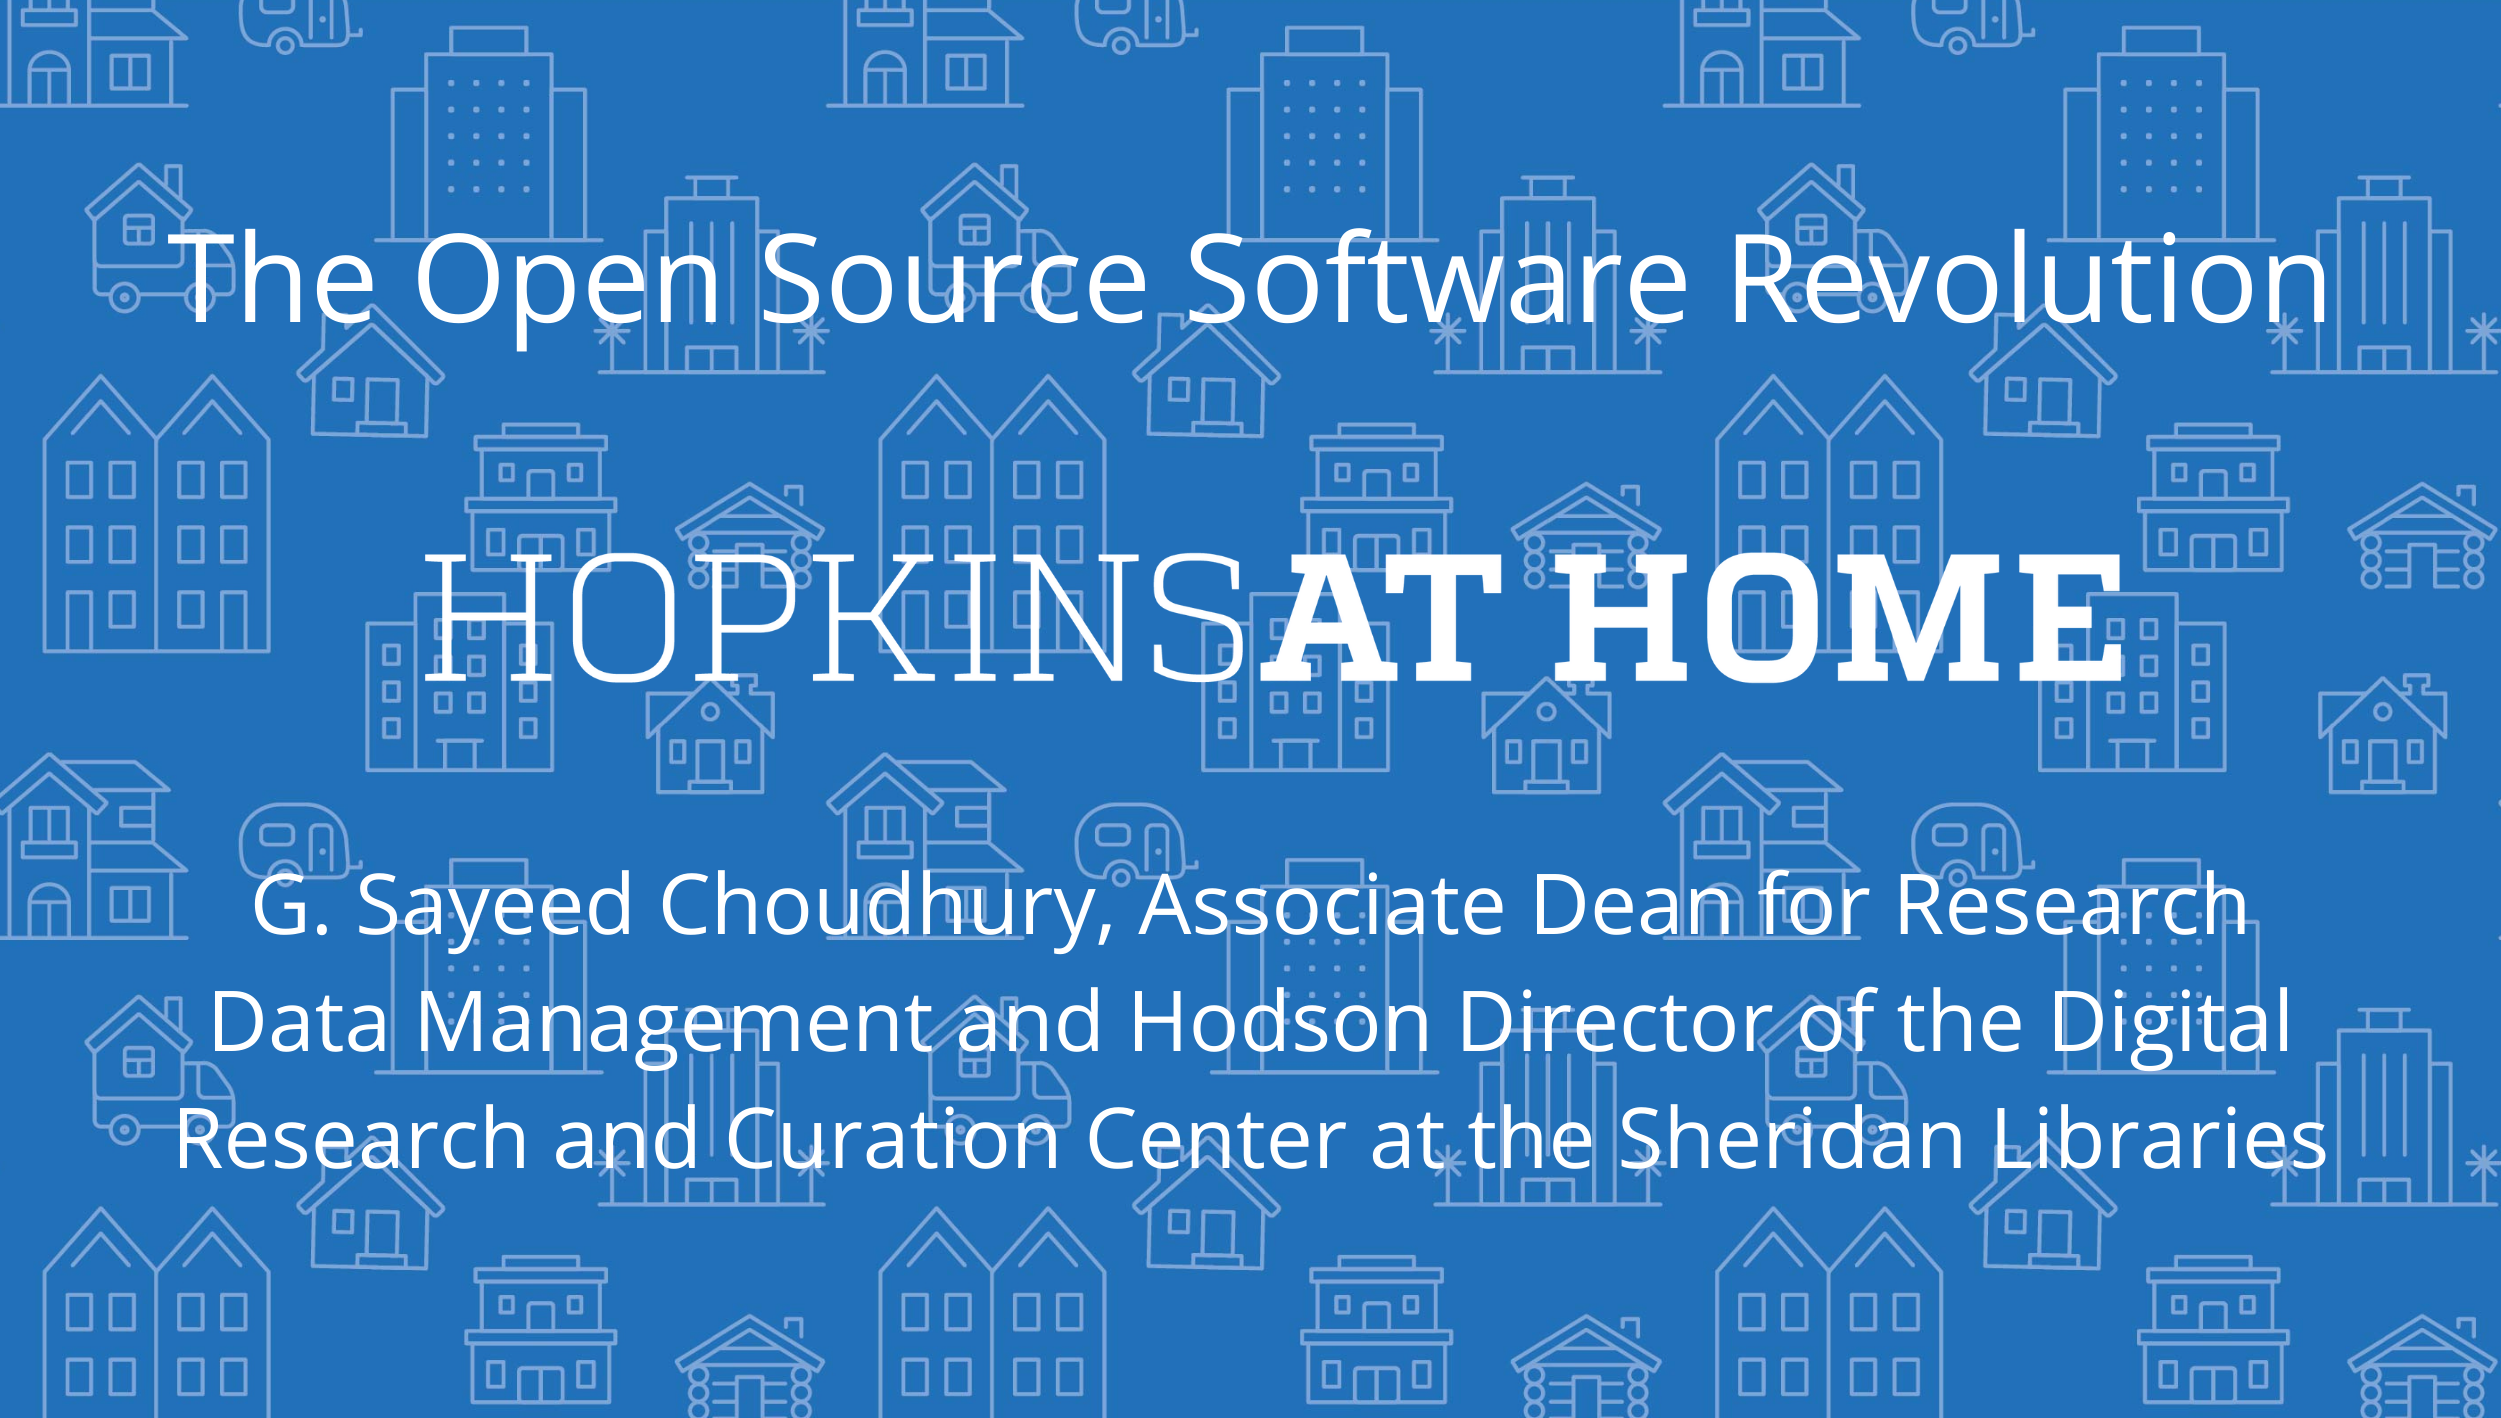 The Open Source Software Revolution